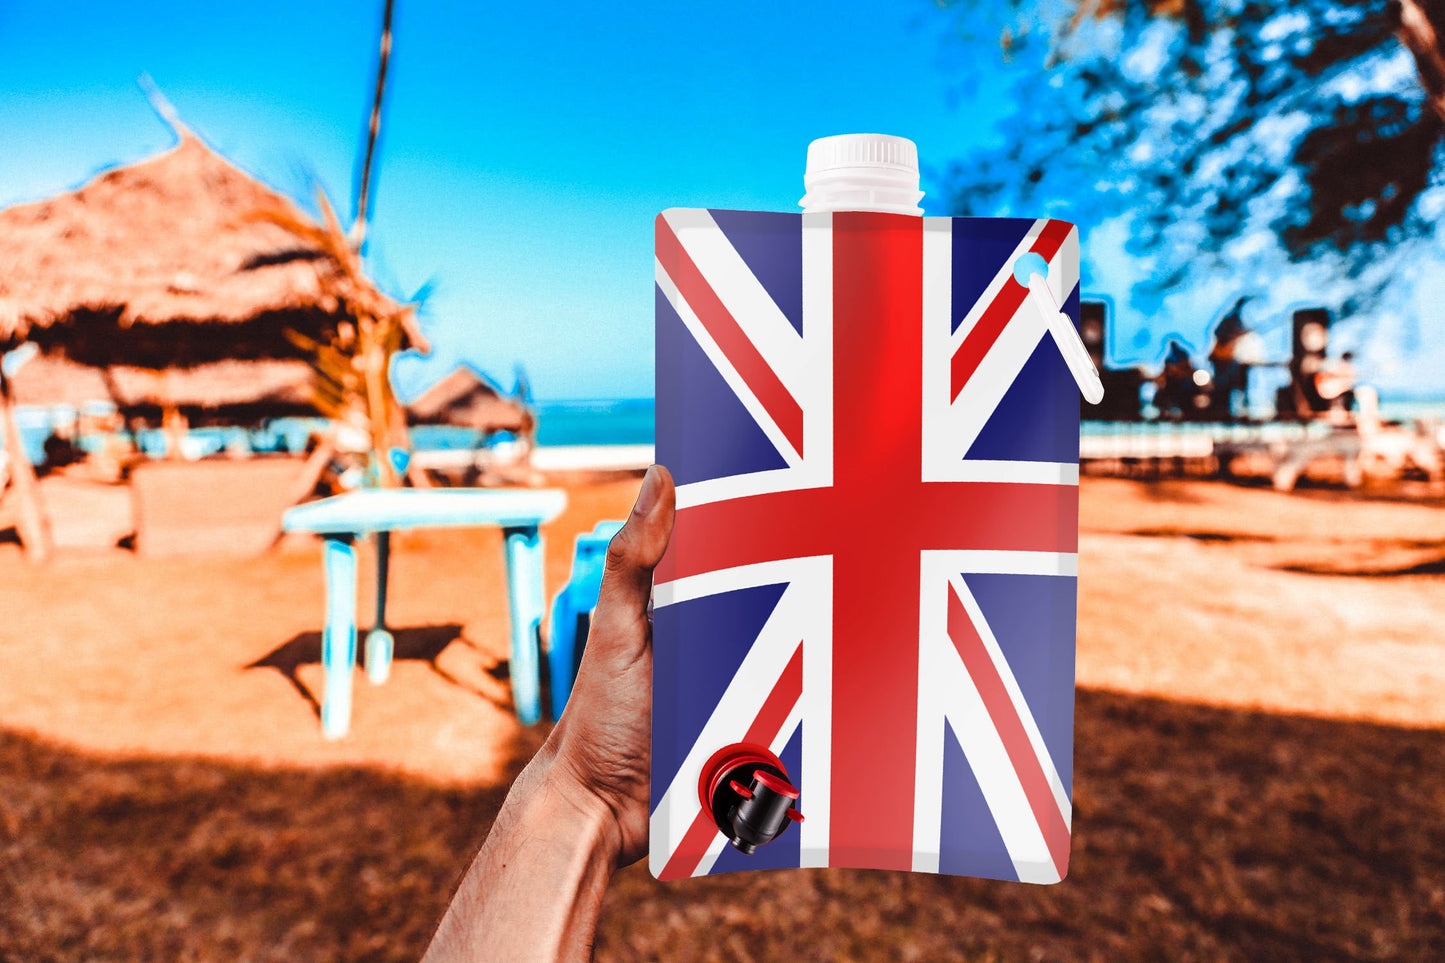 Union Jack Flag Party Flask: 2 liter British Flag Flasks Make the Perfect Drink Dispenser for Your St Georges Day or Guy Fawkes,Bonfire Night Party Supplies,Football, Cricket,or Rugby Parties and More